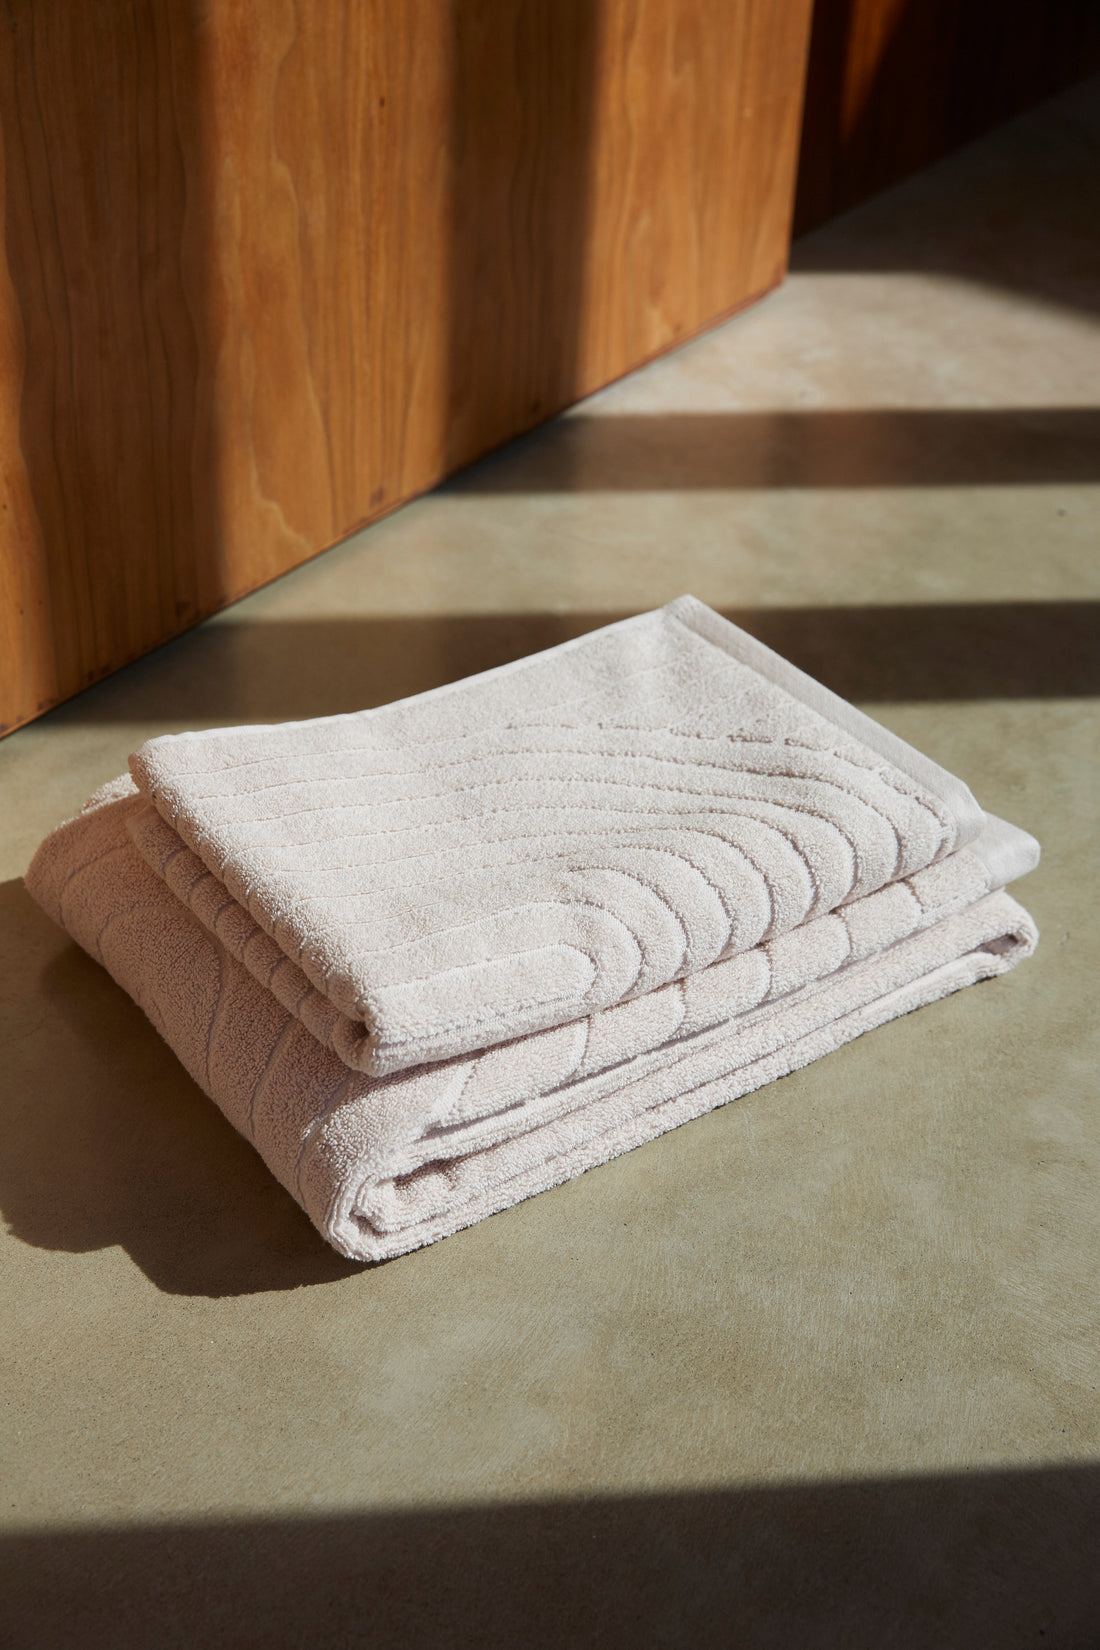 BAINA Cove Bath Towel - Clay | The Source - Leader in Luxury Kitchen & Bathroom Products in Adelaide, Australia